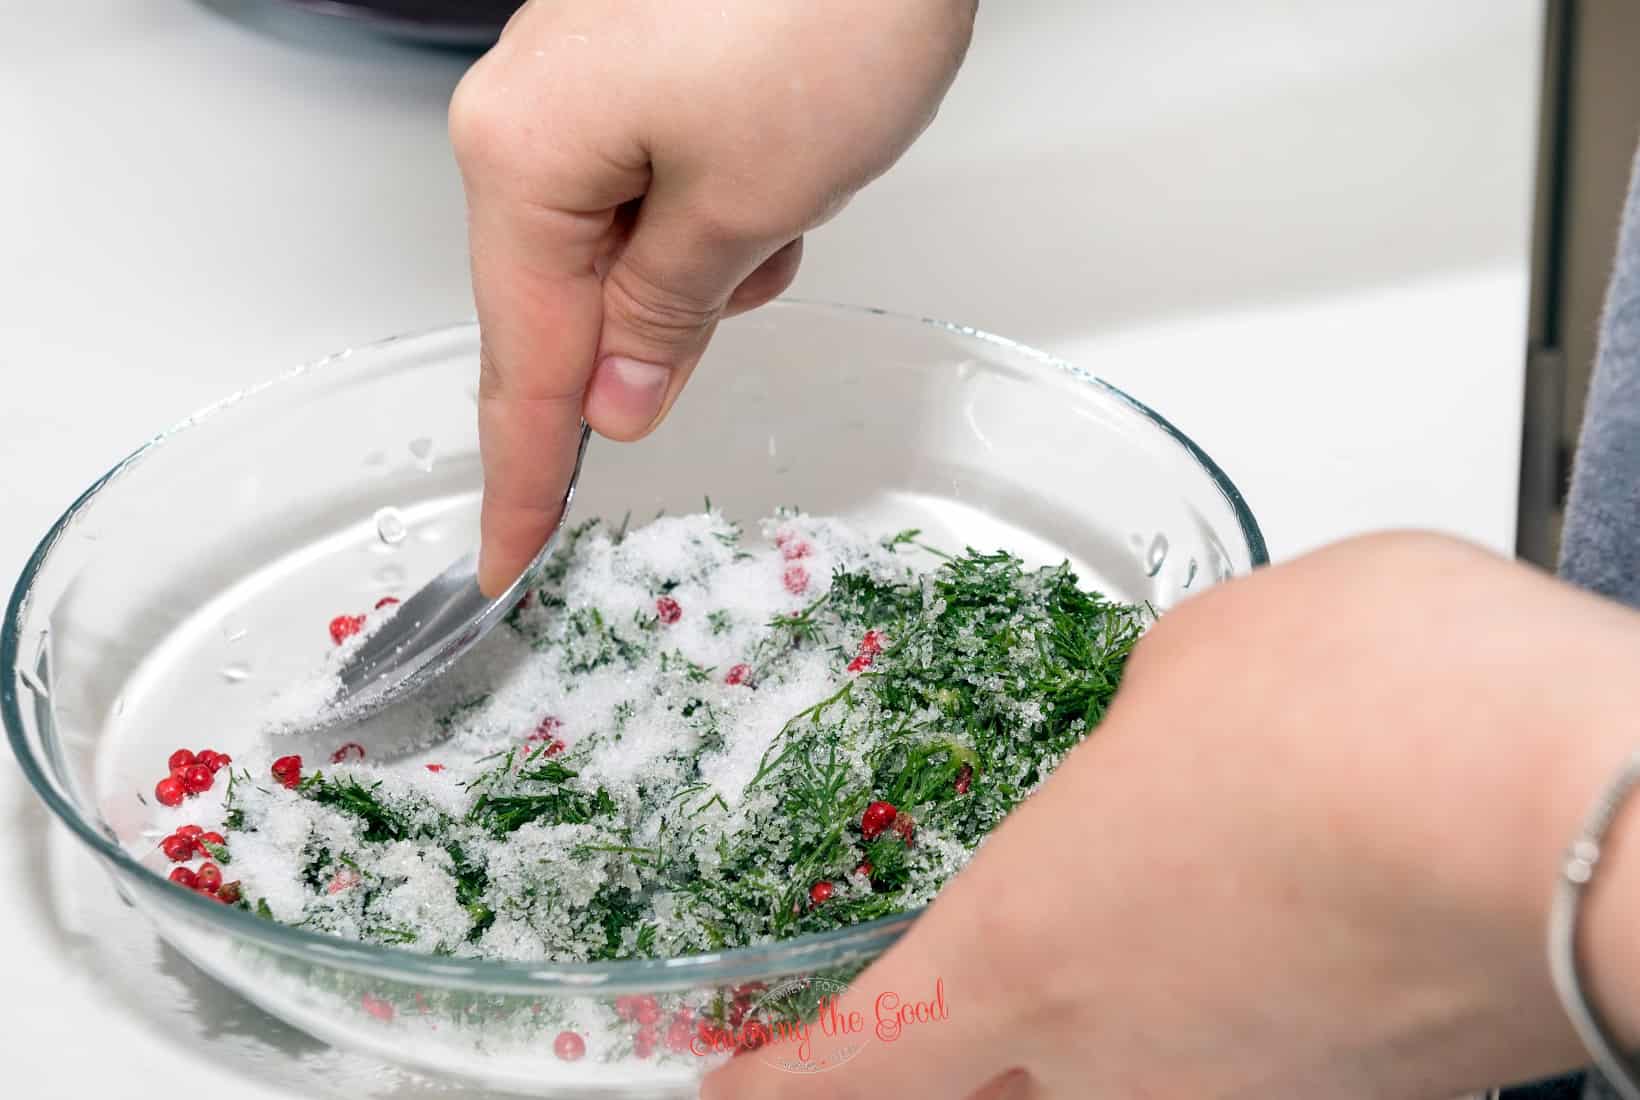 A person mixing greens and pomegranate in a bowl.